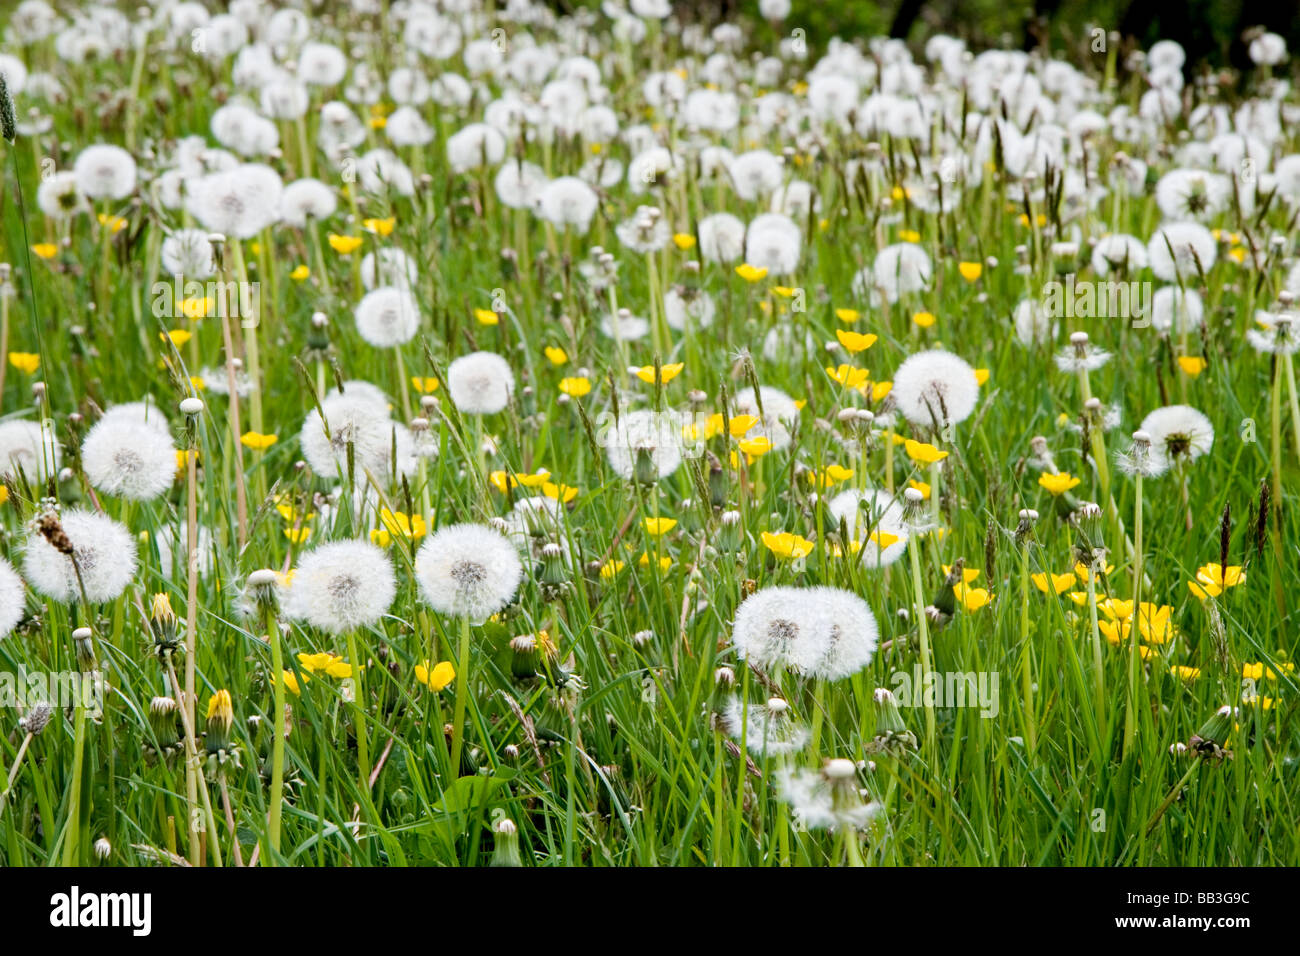 Dandelion clocks and buttercups in an English meadow Stock Photo